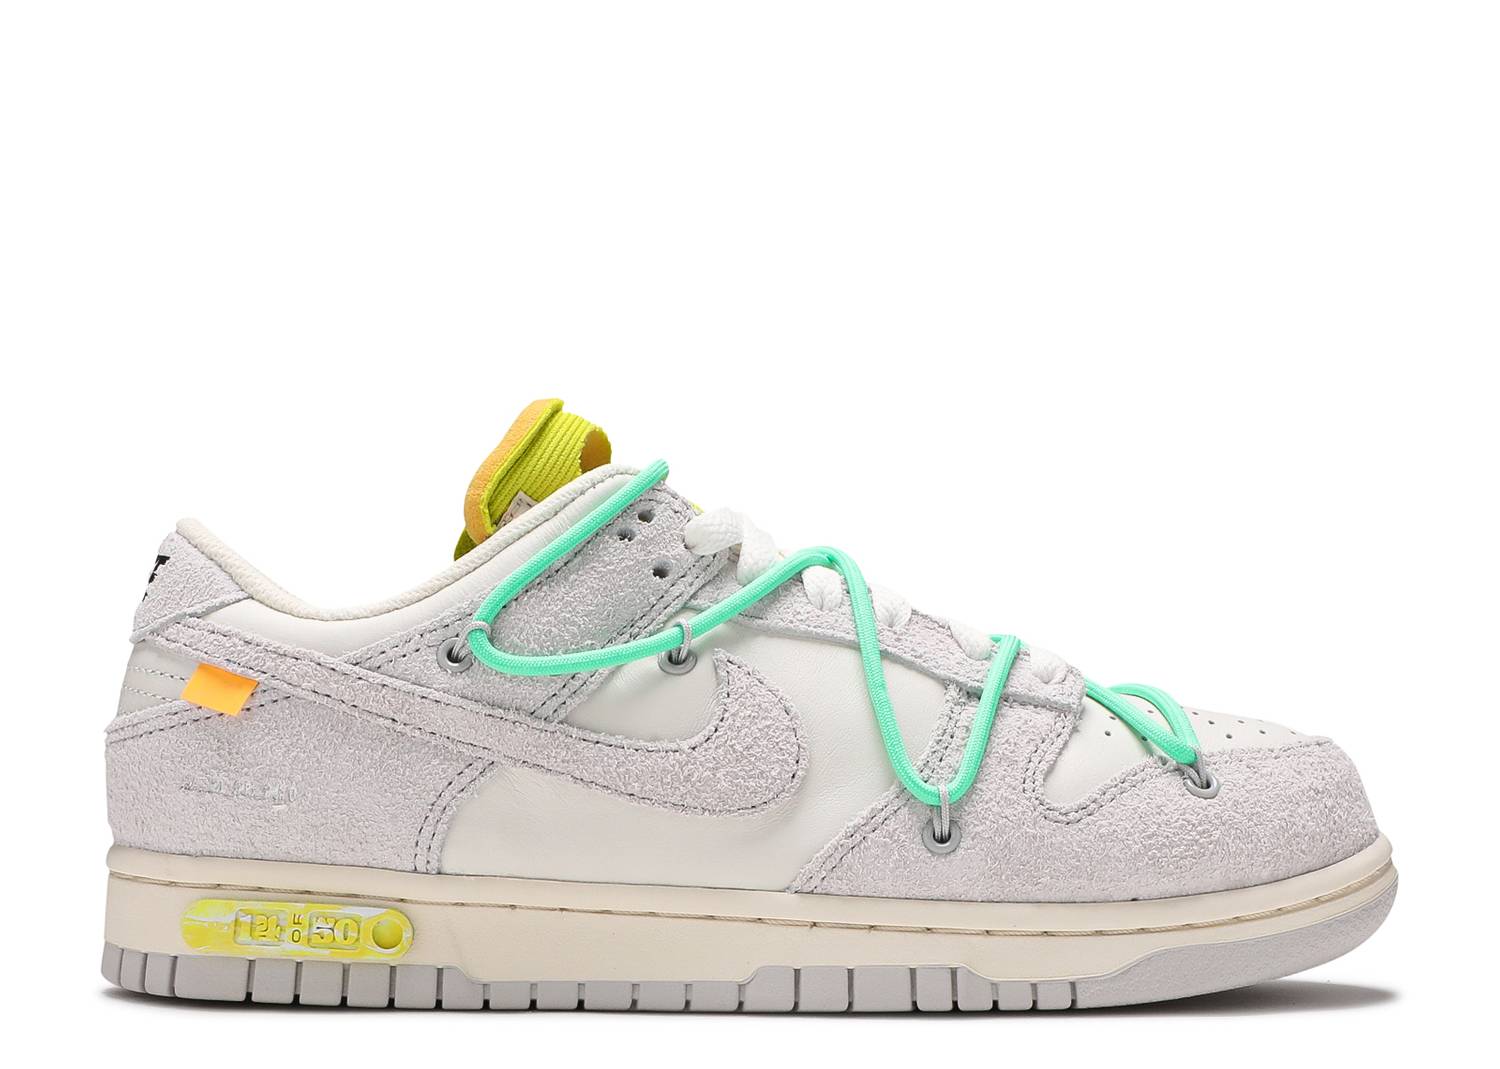 NIKE DUNK LOW X OFF-WHITE “LOT 14”